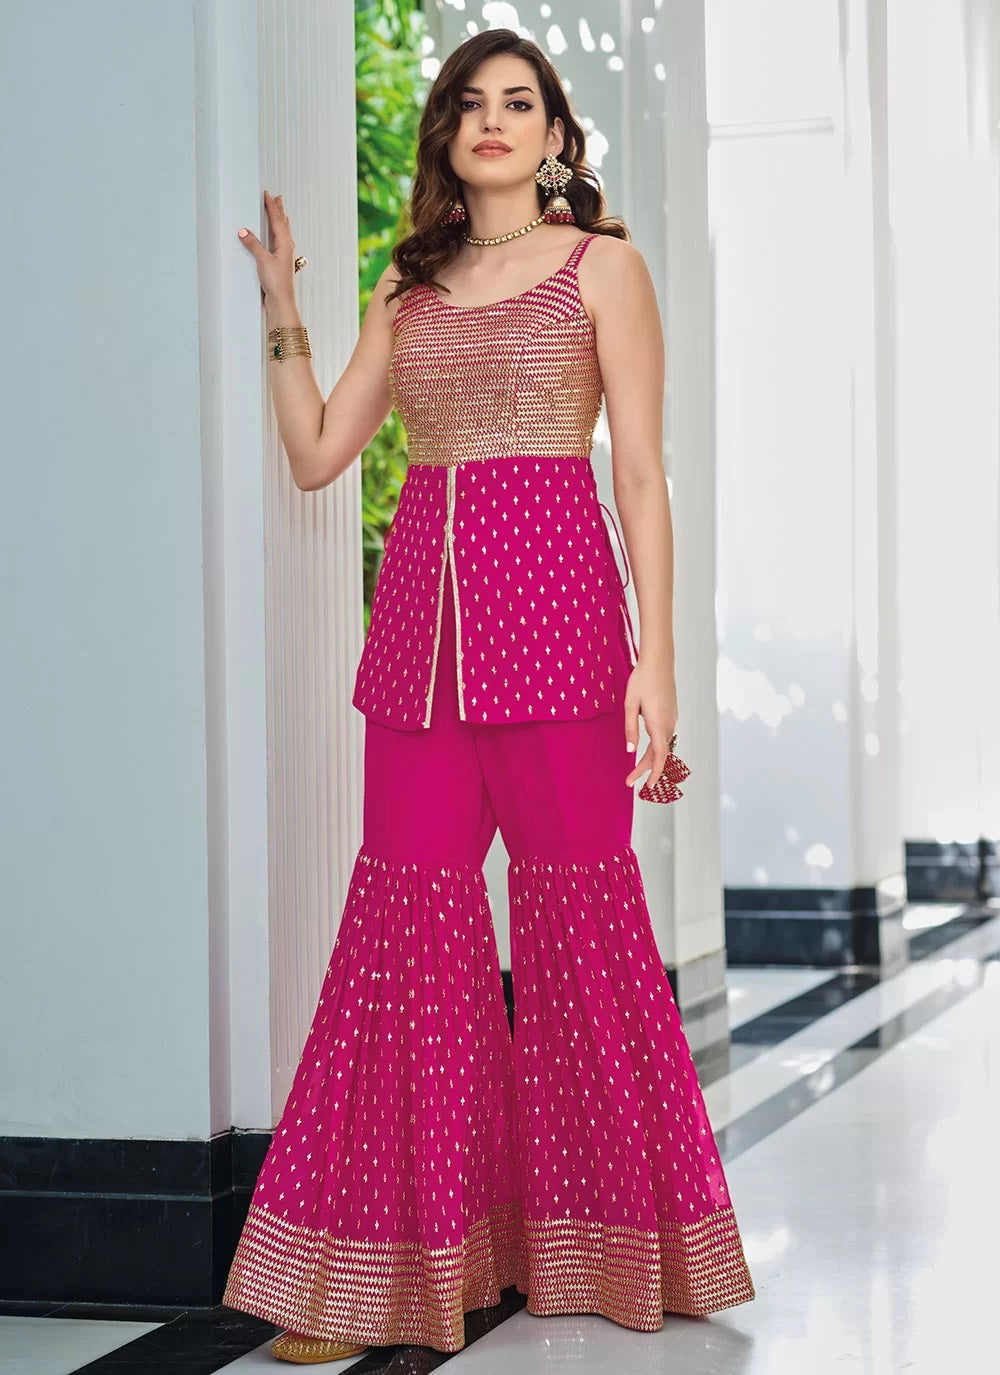 Readymade Embroidered Sharara Style Suit In Deep Pink